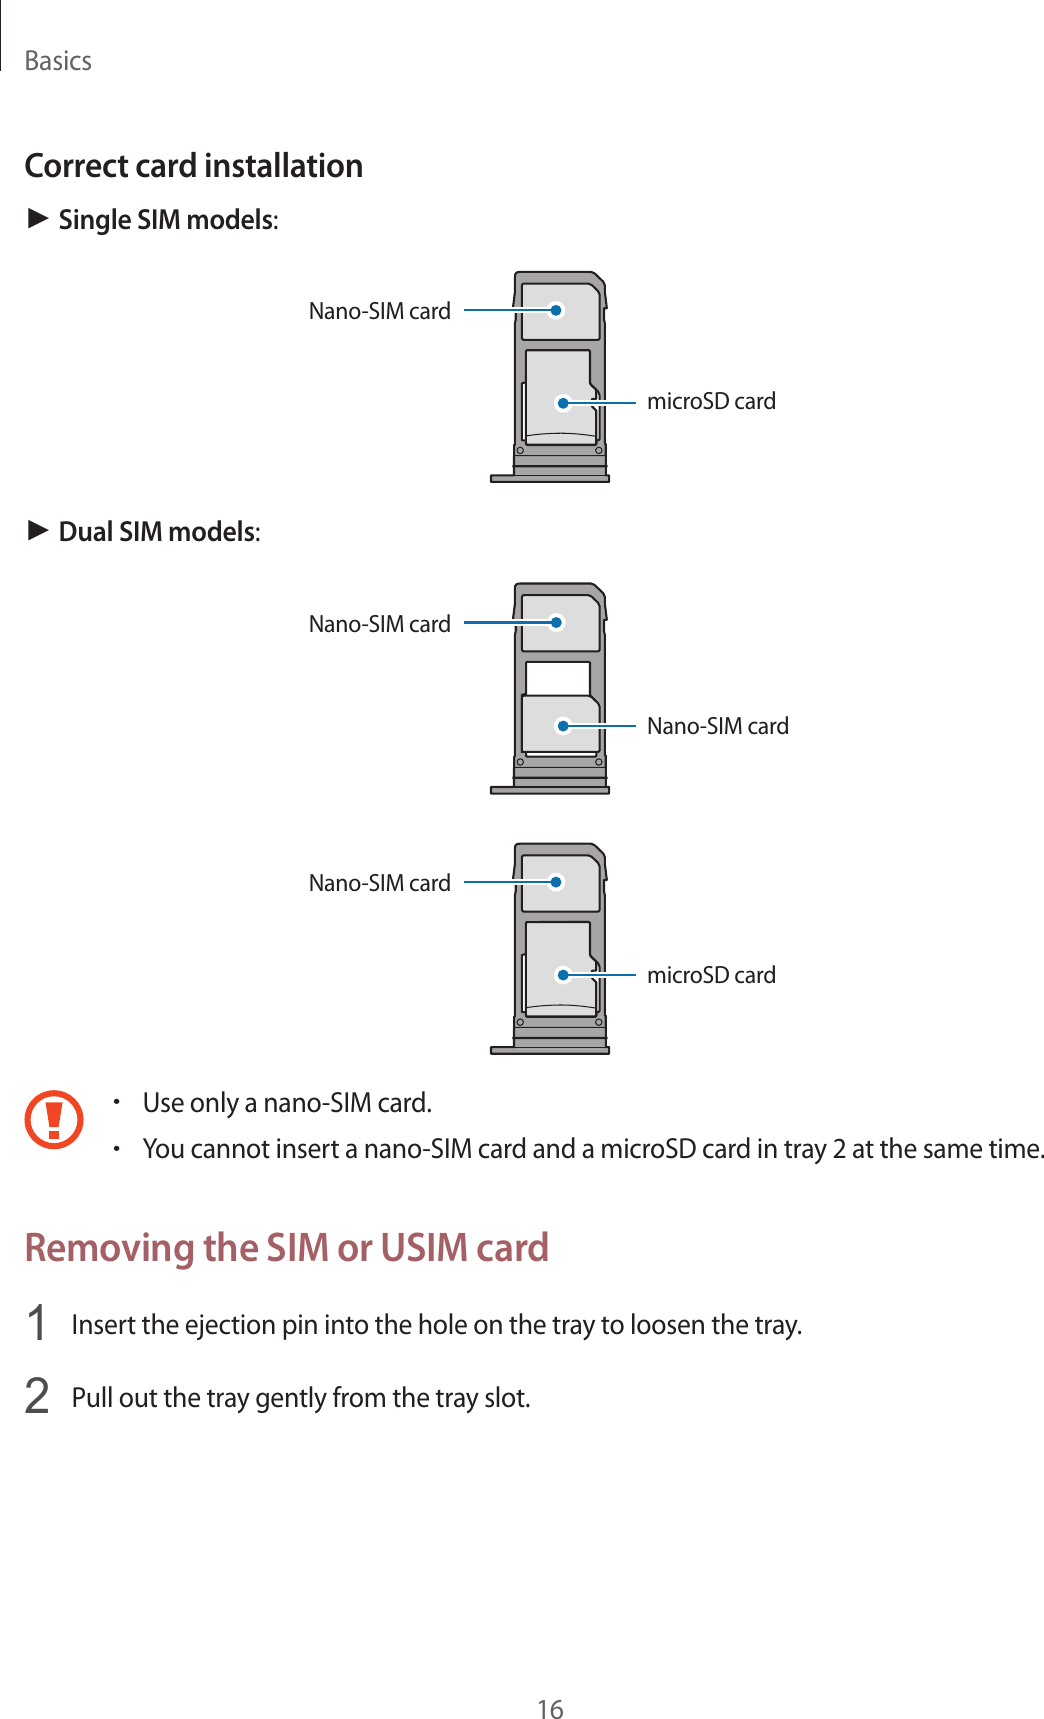 Basics16Correct card installation► Single SIM models:Nano-SIM cardmicroSD card► Dual SIM models:Nano-SIM cardNano-SIM cardmicroSD cardNano-SIM card•Use only a nano-SIM card.•You cannot insert a nano-SIM card and a microSD card in tray 2 at the same time.Removing the SIM or USIM card1  Insert the ejection pin into the hole on the tray to loosen the tray.2  Pull out the tray gently from the tray slot.